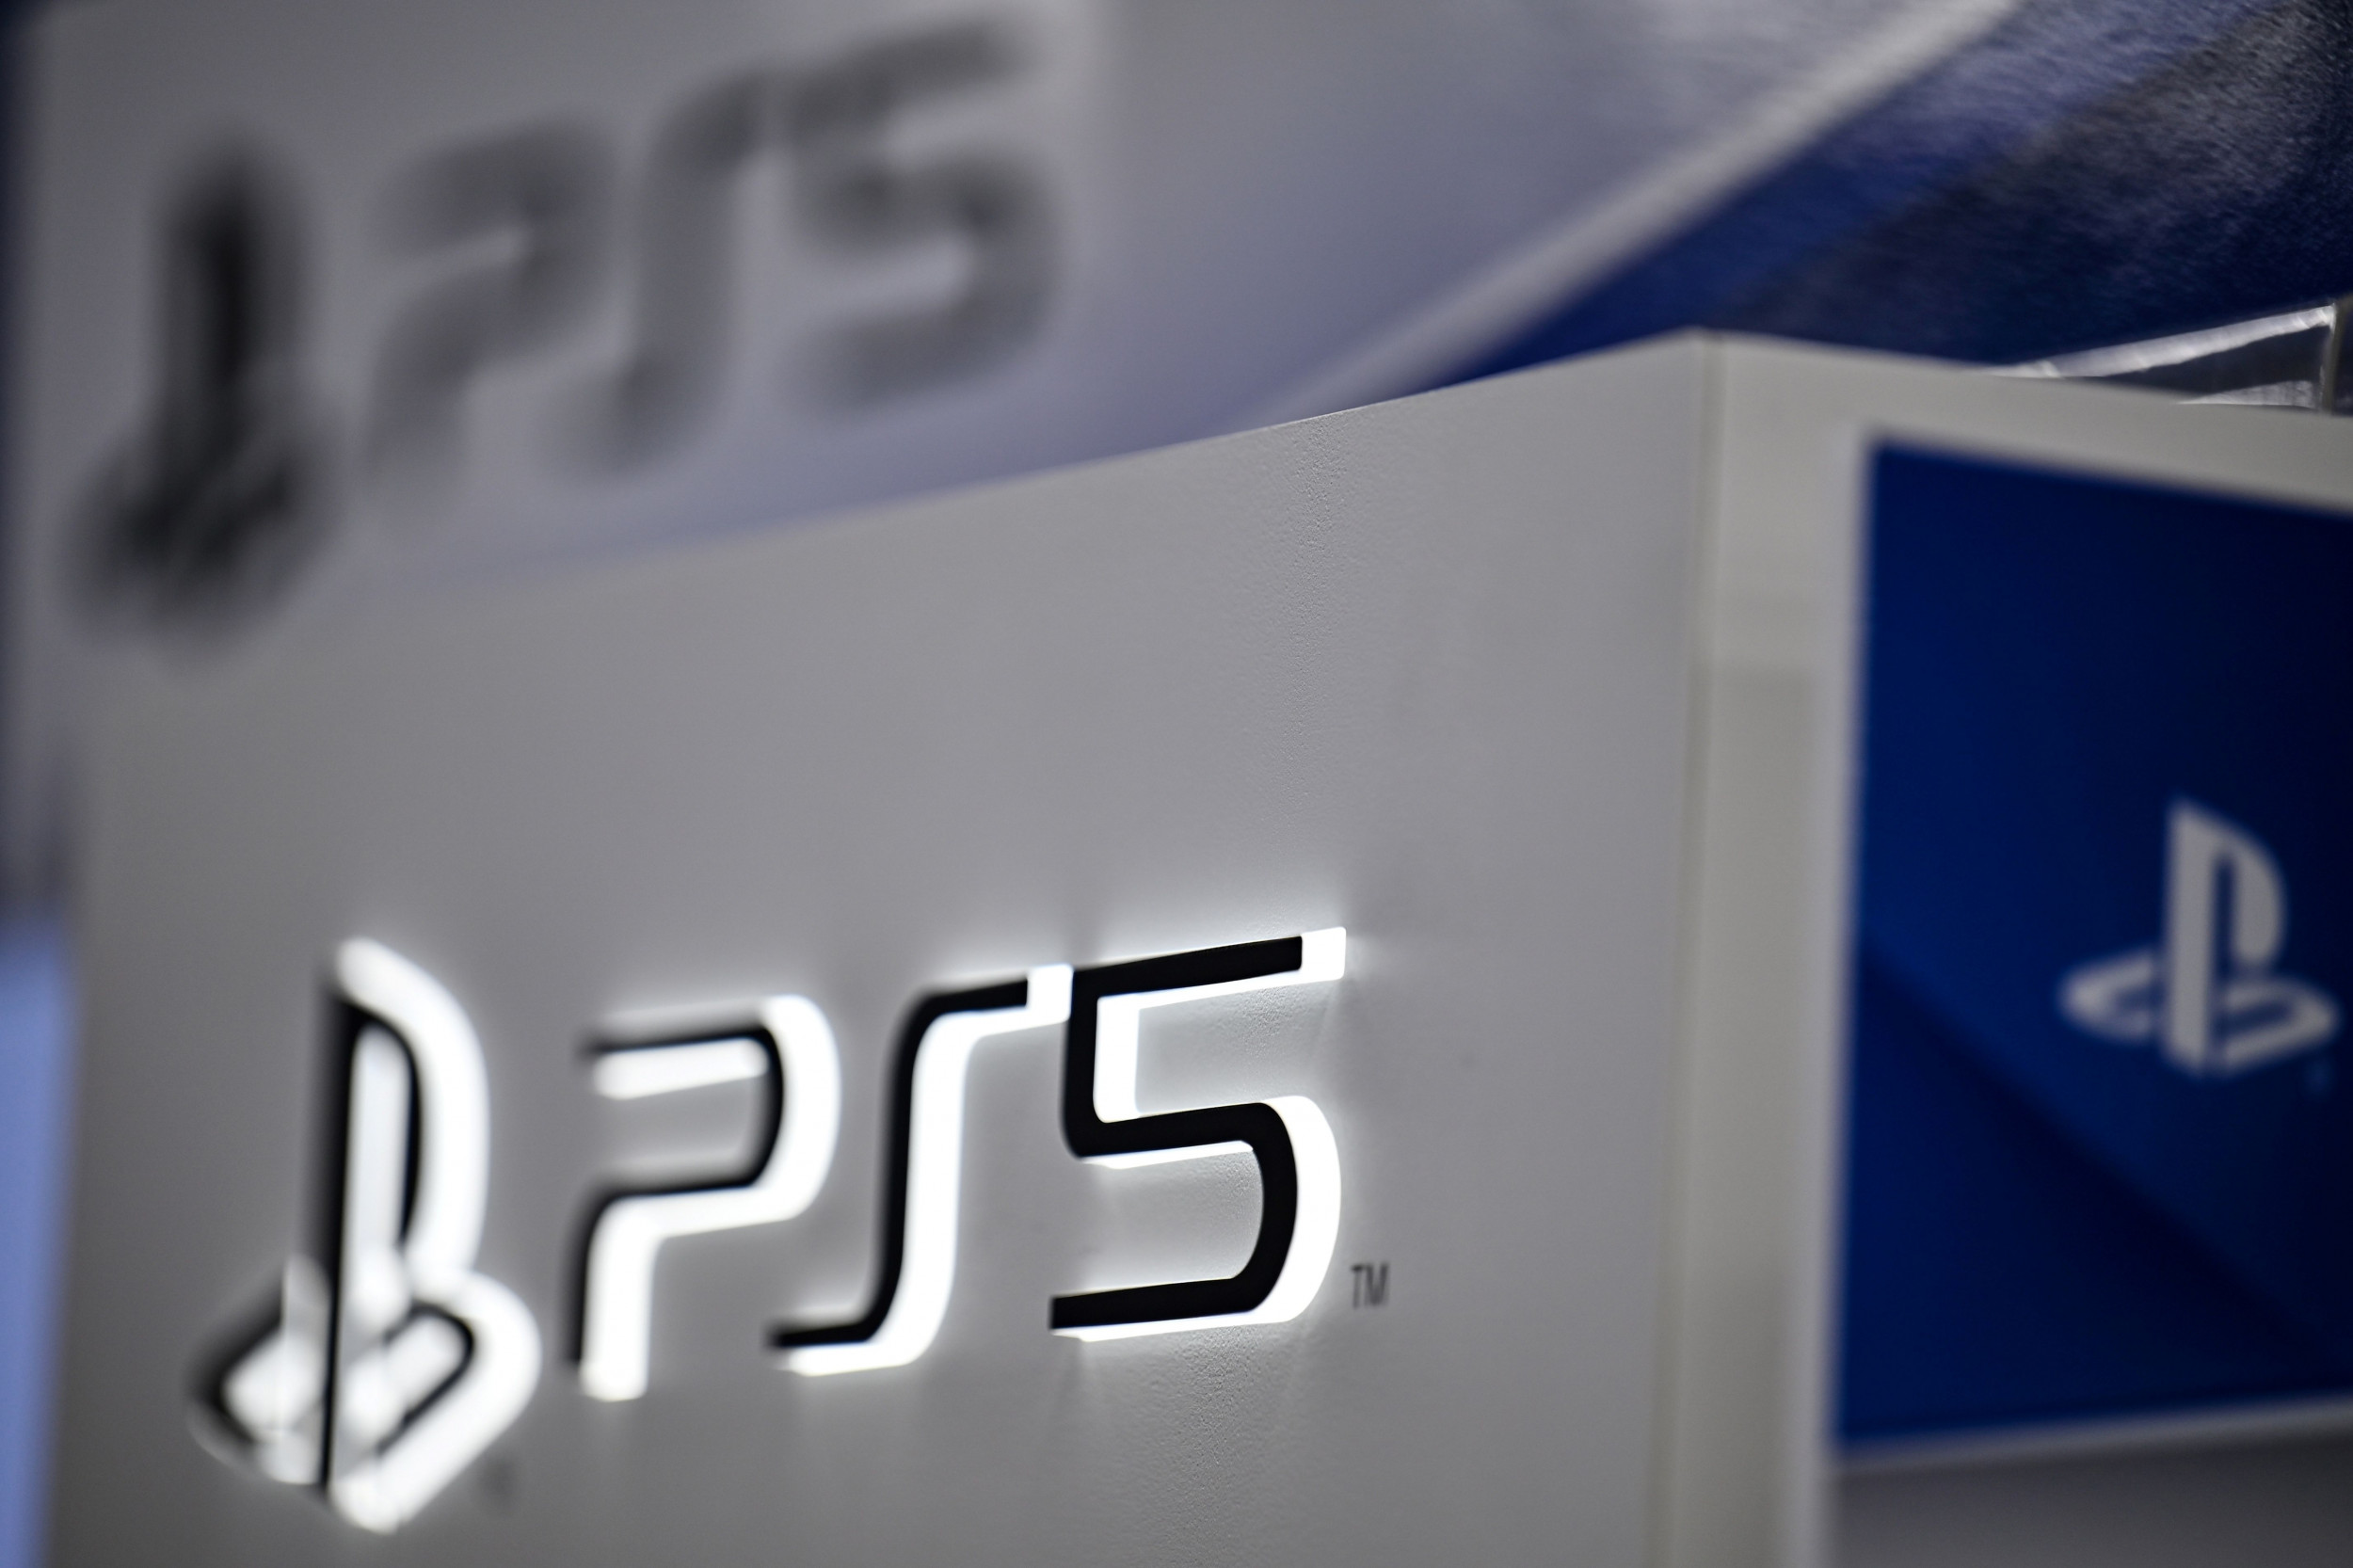 New Year PS5 Update for Target, Walmart, Best Buy and more